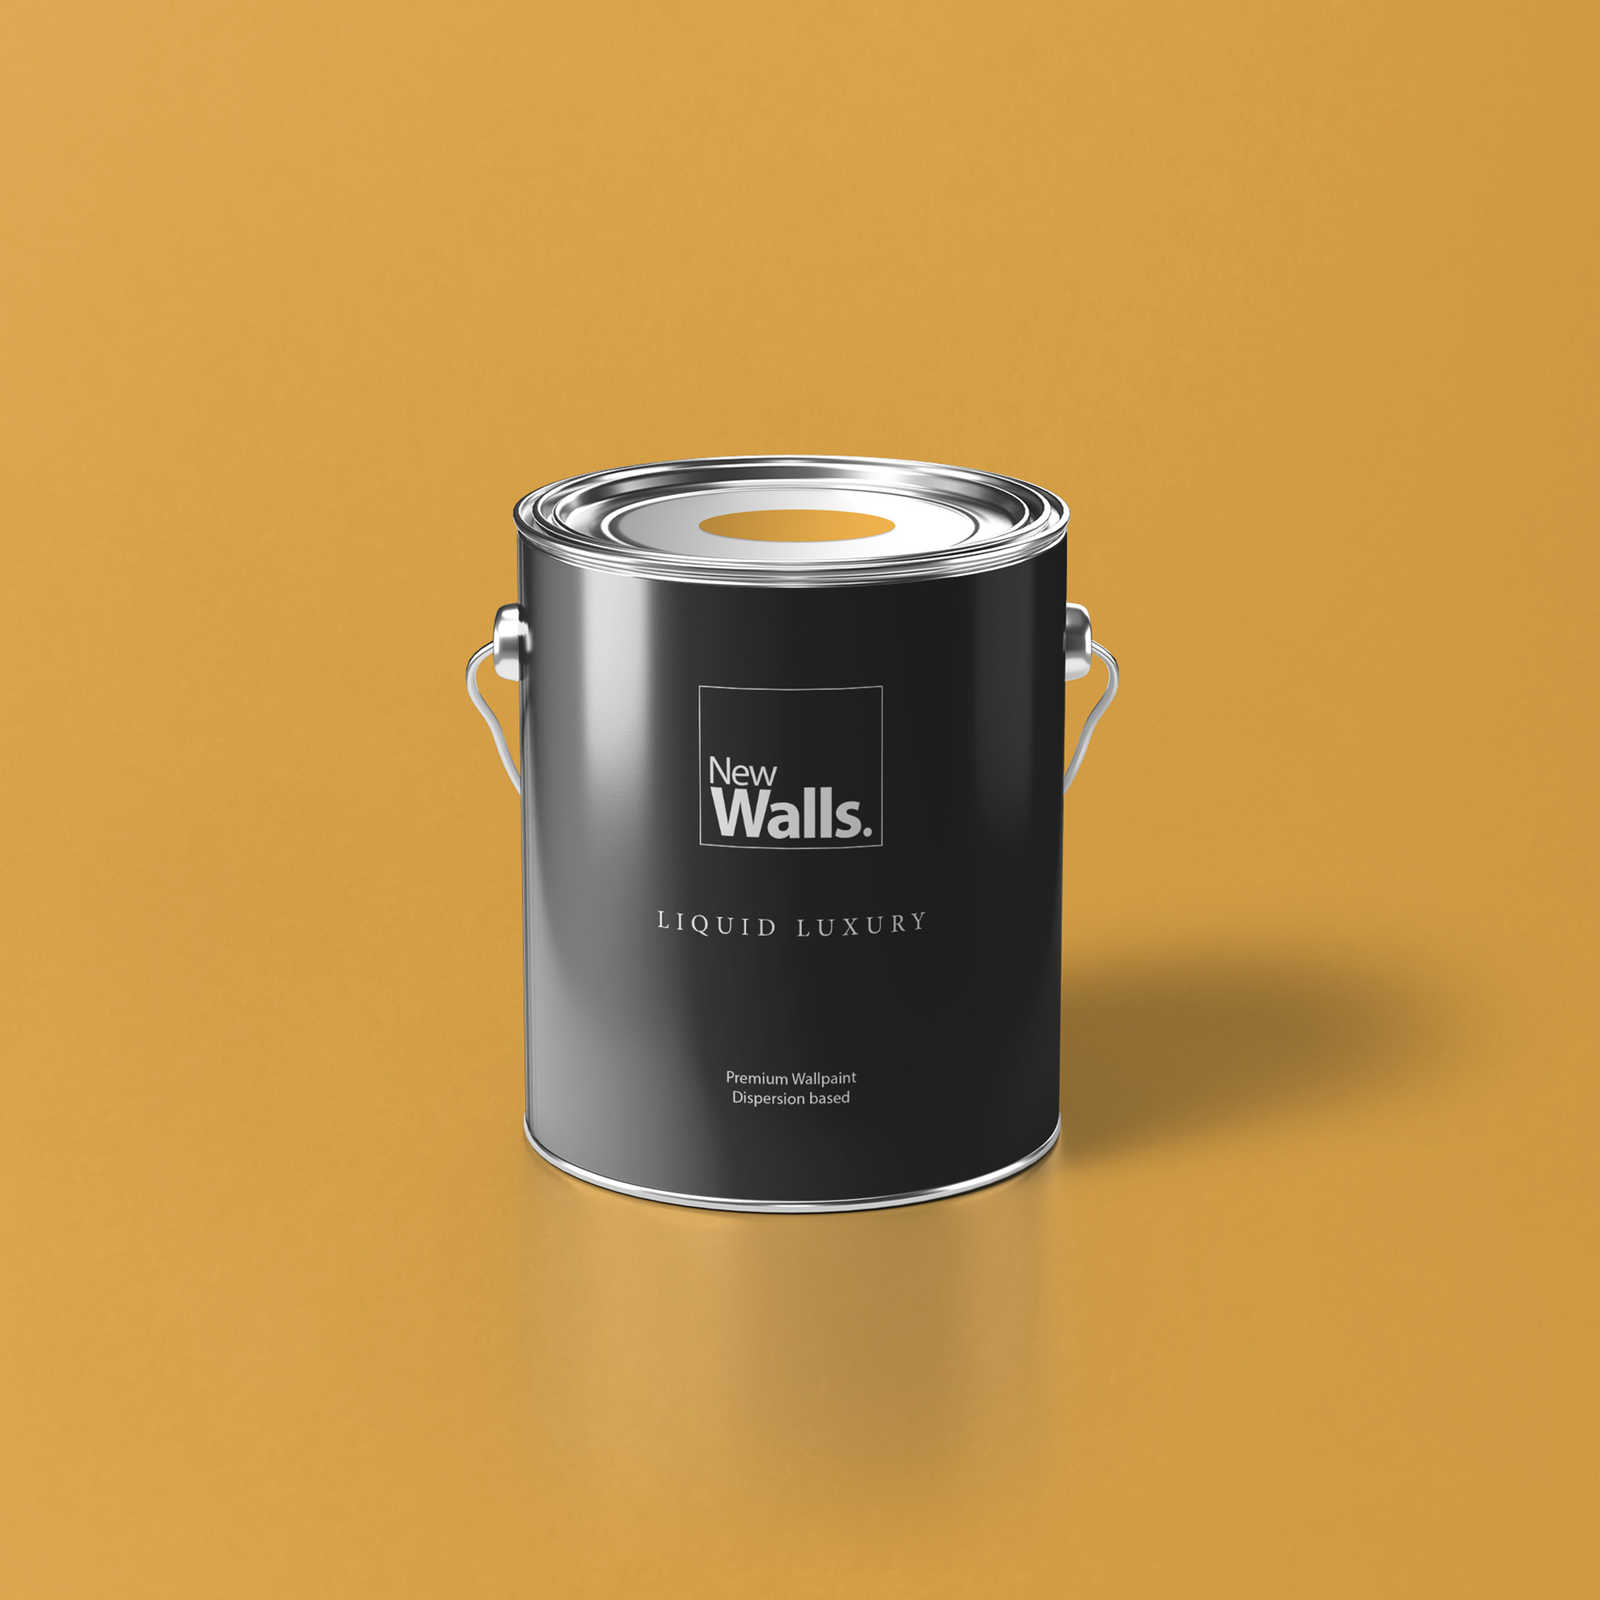 Premium Wall Paint strong saffron yellow »Juicy Yellow« NW806 – 2,5 litre
